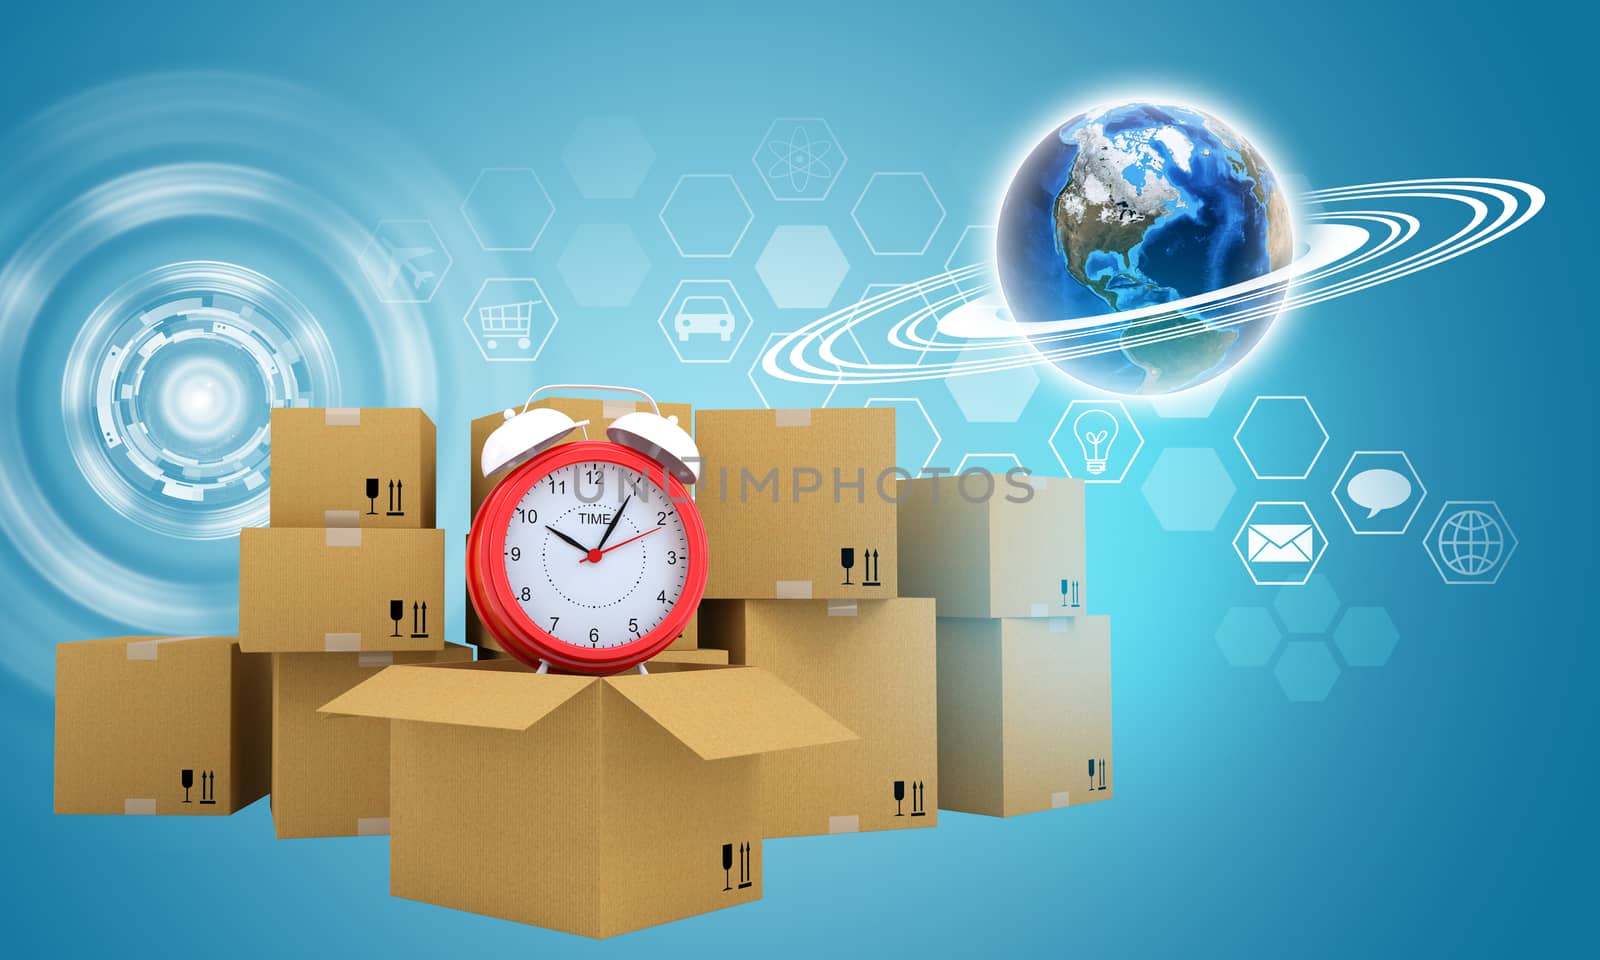 Postal boxes on them alarm clock. Backdrop of earth and hexagon. Blue background. Elements of this image furnished by NASA